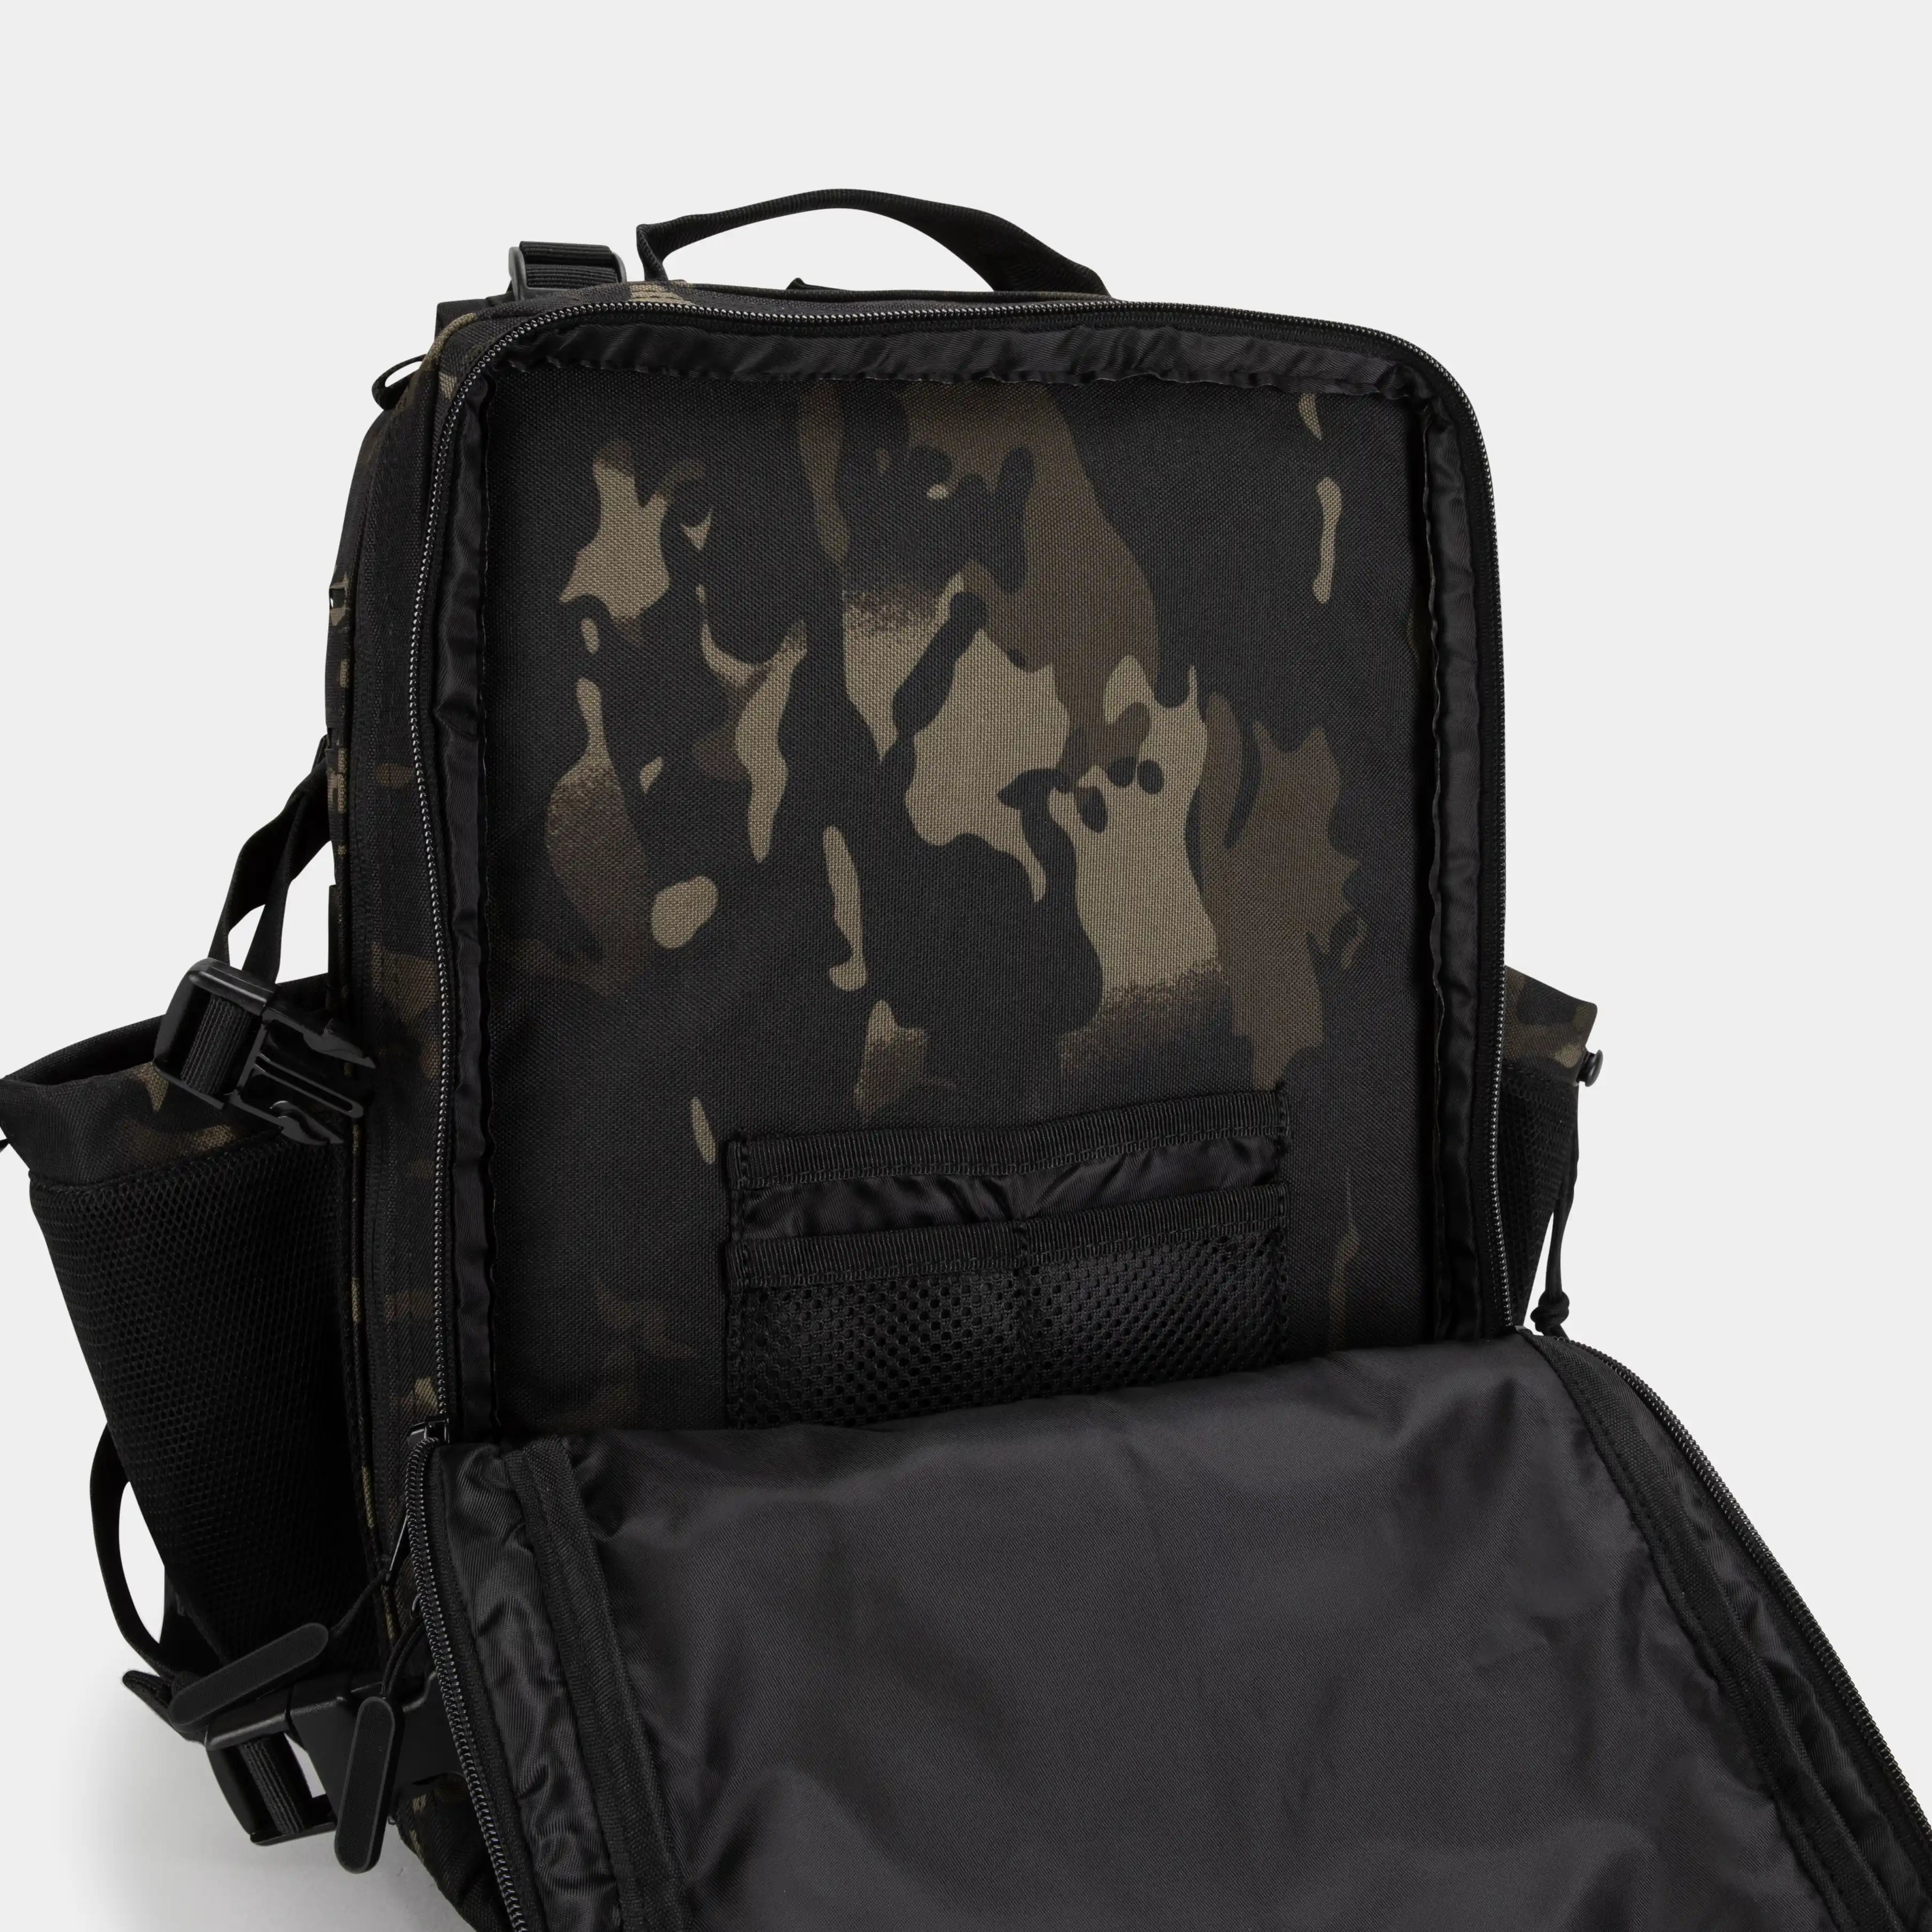 Built for Athletes Backpacks Small Black Camo Gym Backpack